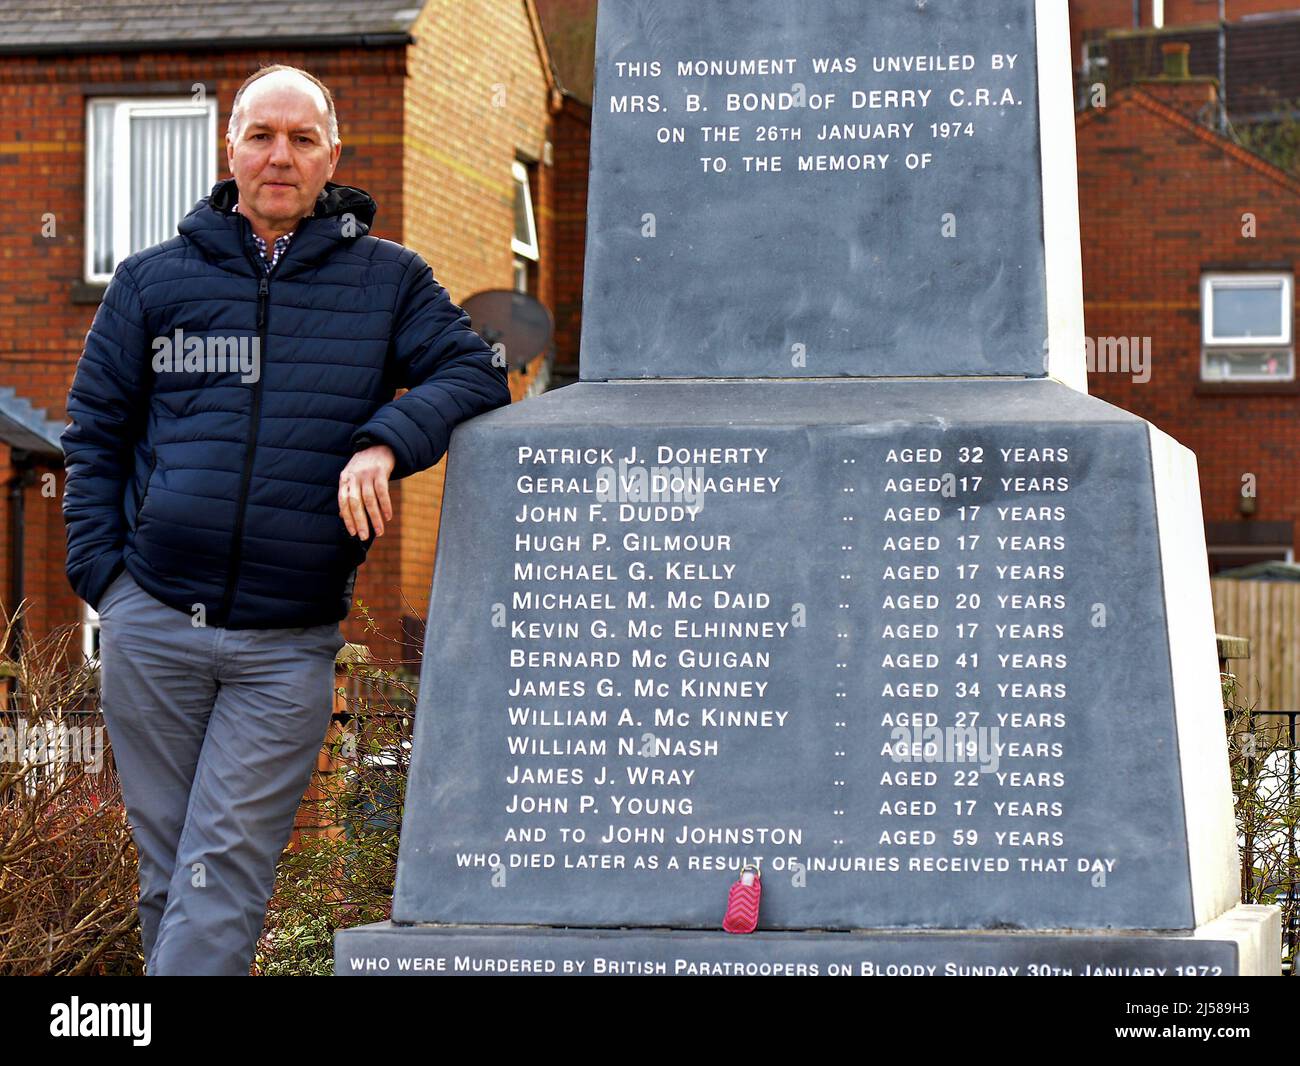 Tony Doherty whose father Patrick was killed, by British Paratroopers, on Bloody Sunday 1972 in Derry, Northern Ireland, pictured at the Bloody Sunday memorial. ©George Sweeney / Alamy Stock Photo Stock Photo